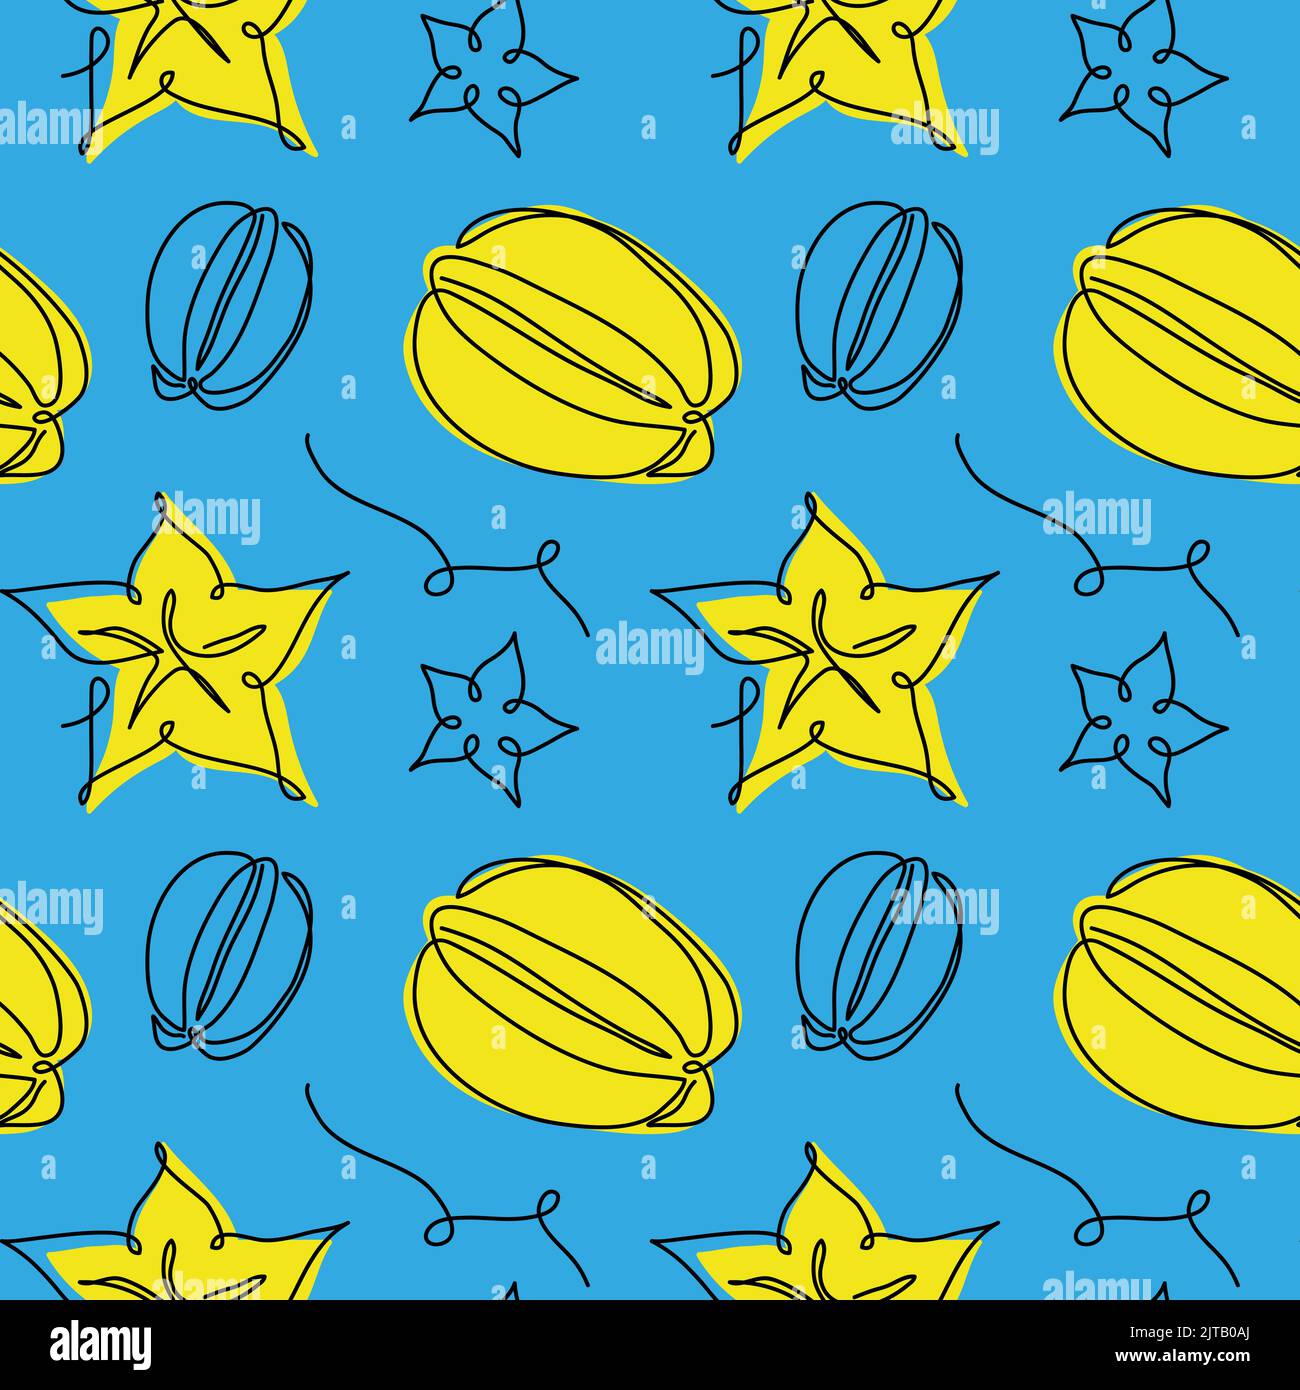 Carambola yellow fruit vector seamless pattern on blue background. One continuous line art drawing design of carambola pattern Stock Vector